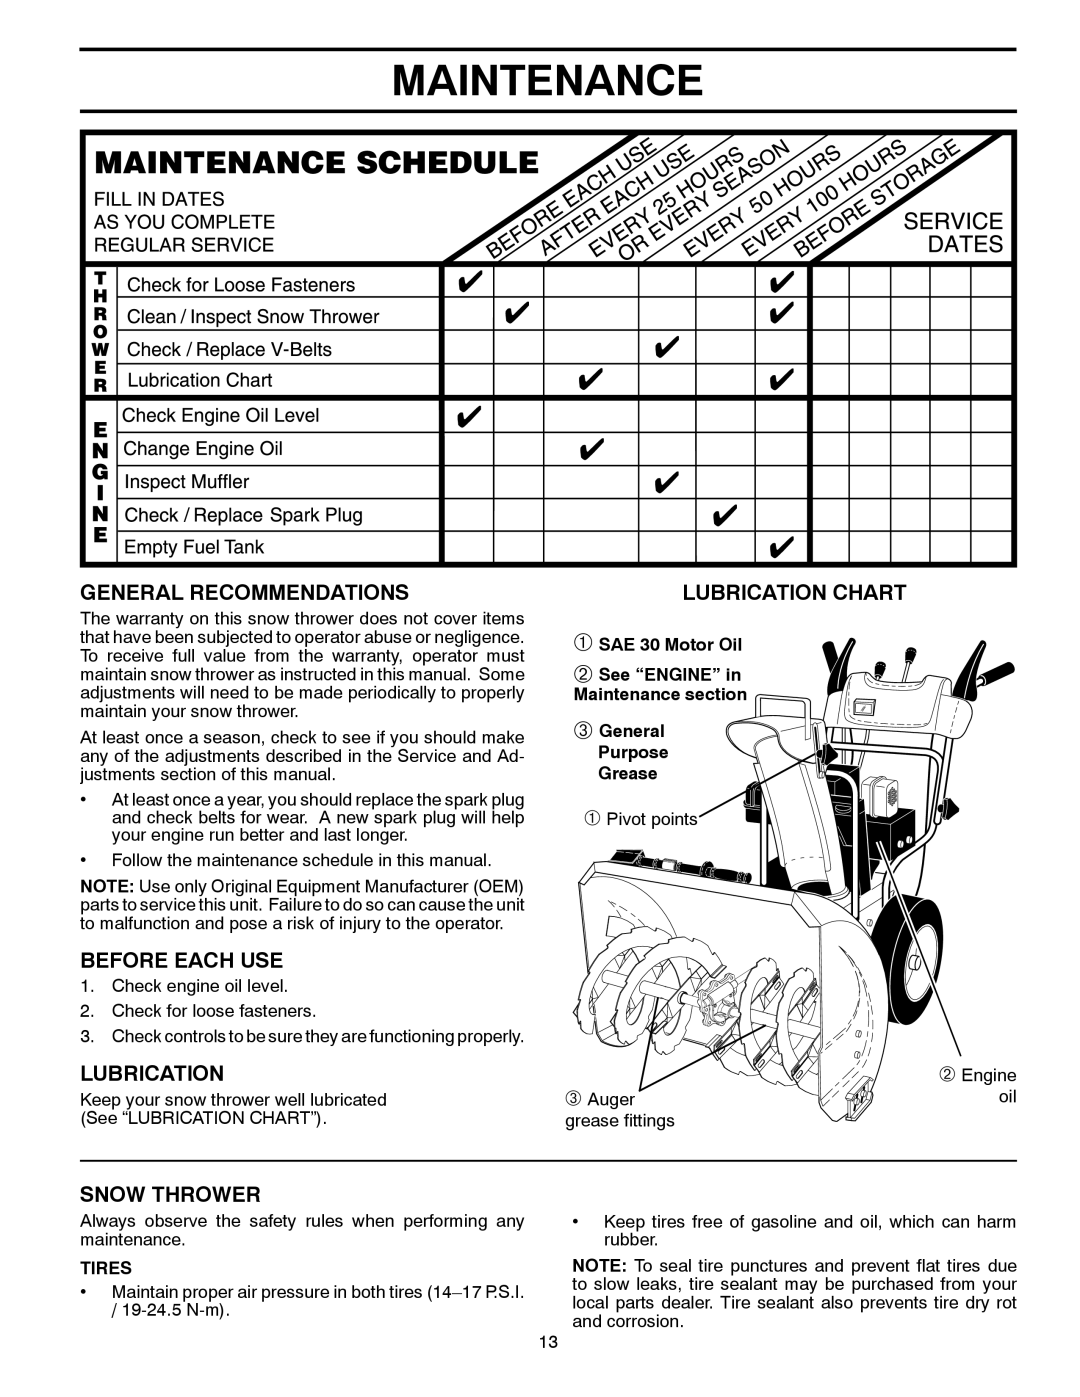 Husqvarna 96193004500 Maintenance, General Recommendations, Before Each Use, Snow Thrower, Lubrication Chart, Tires 